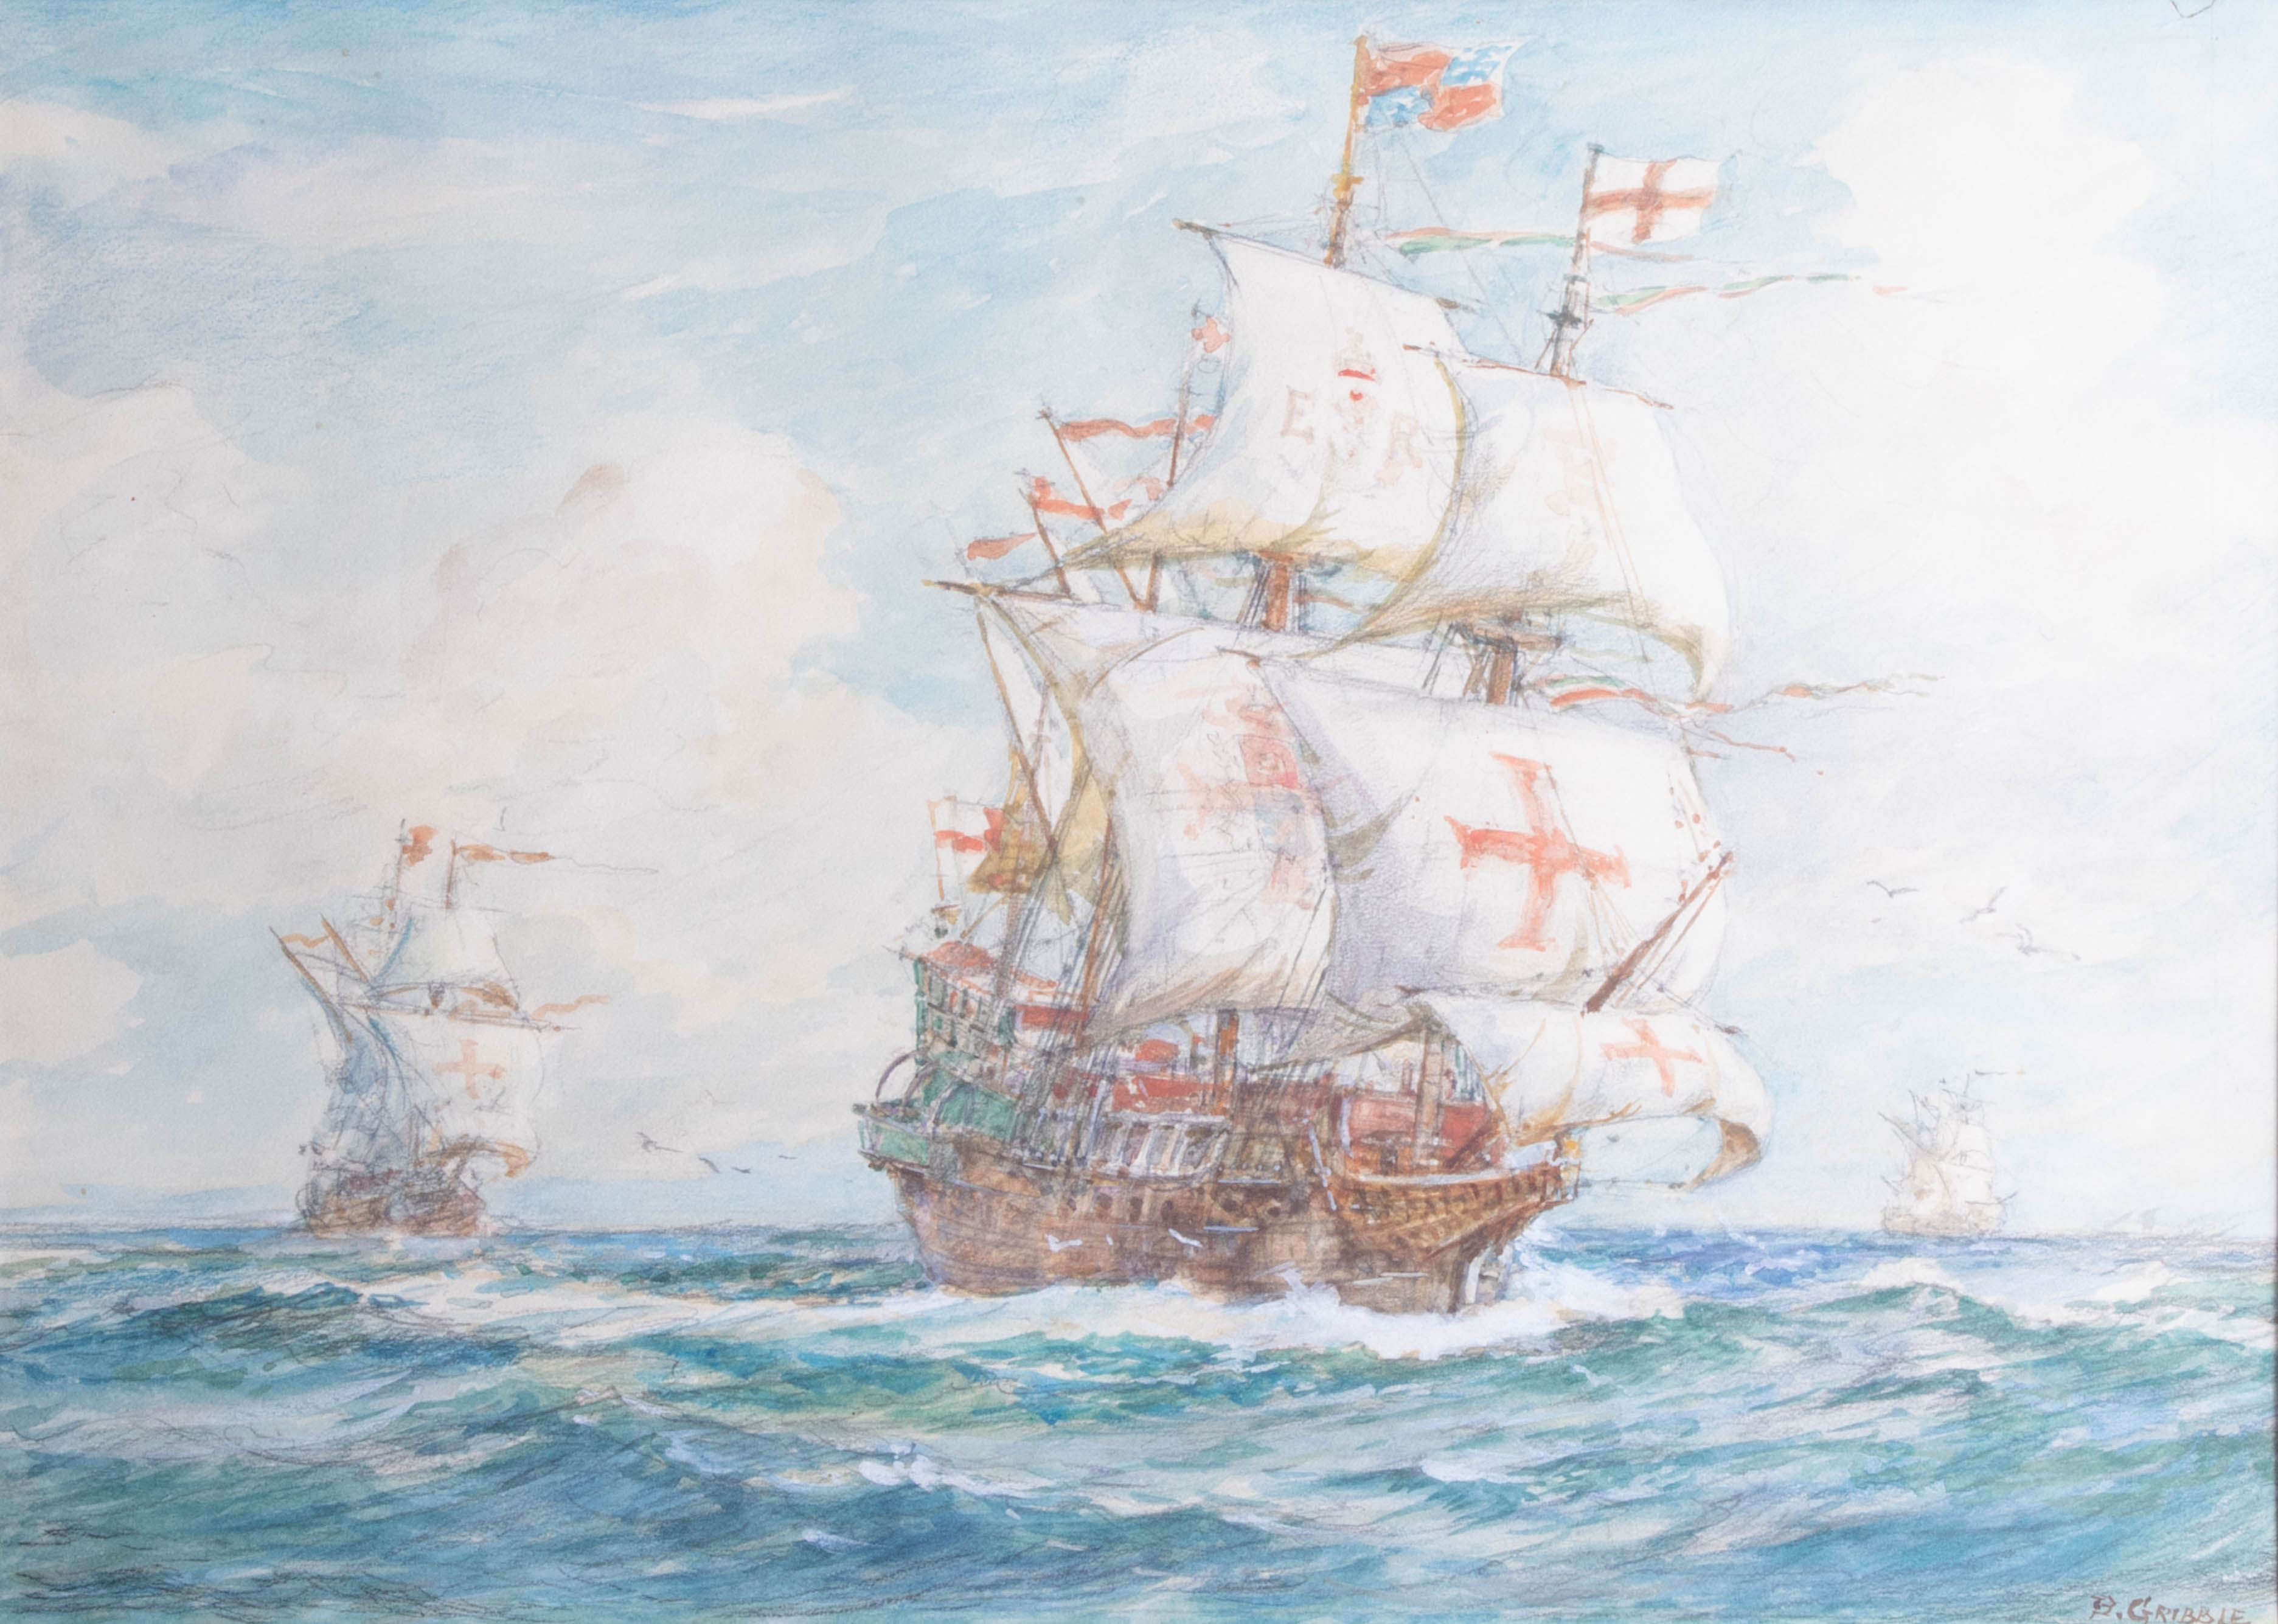 B.Gribble, signed watercolour 'Golden Hind', 32cm x 47cm, framed and glazed. - Image 2 of 2